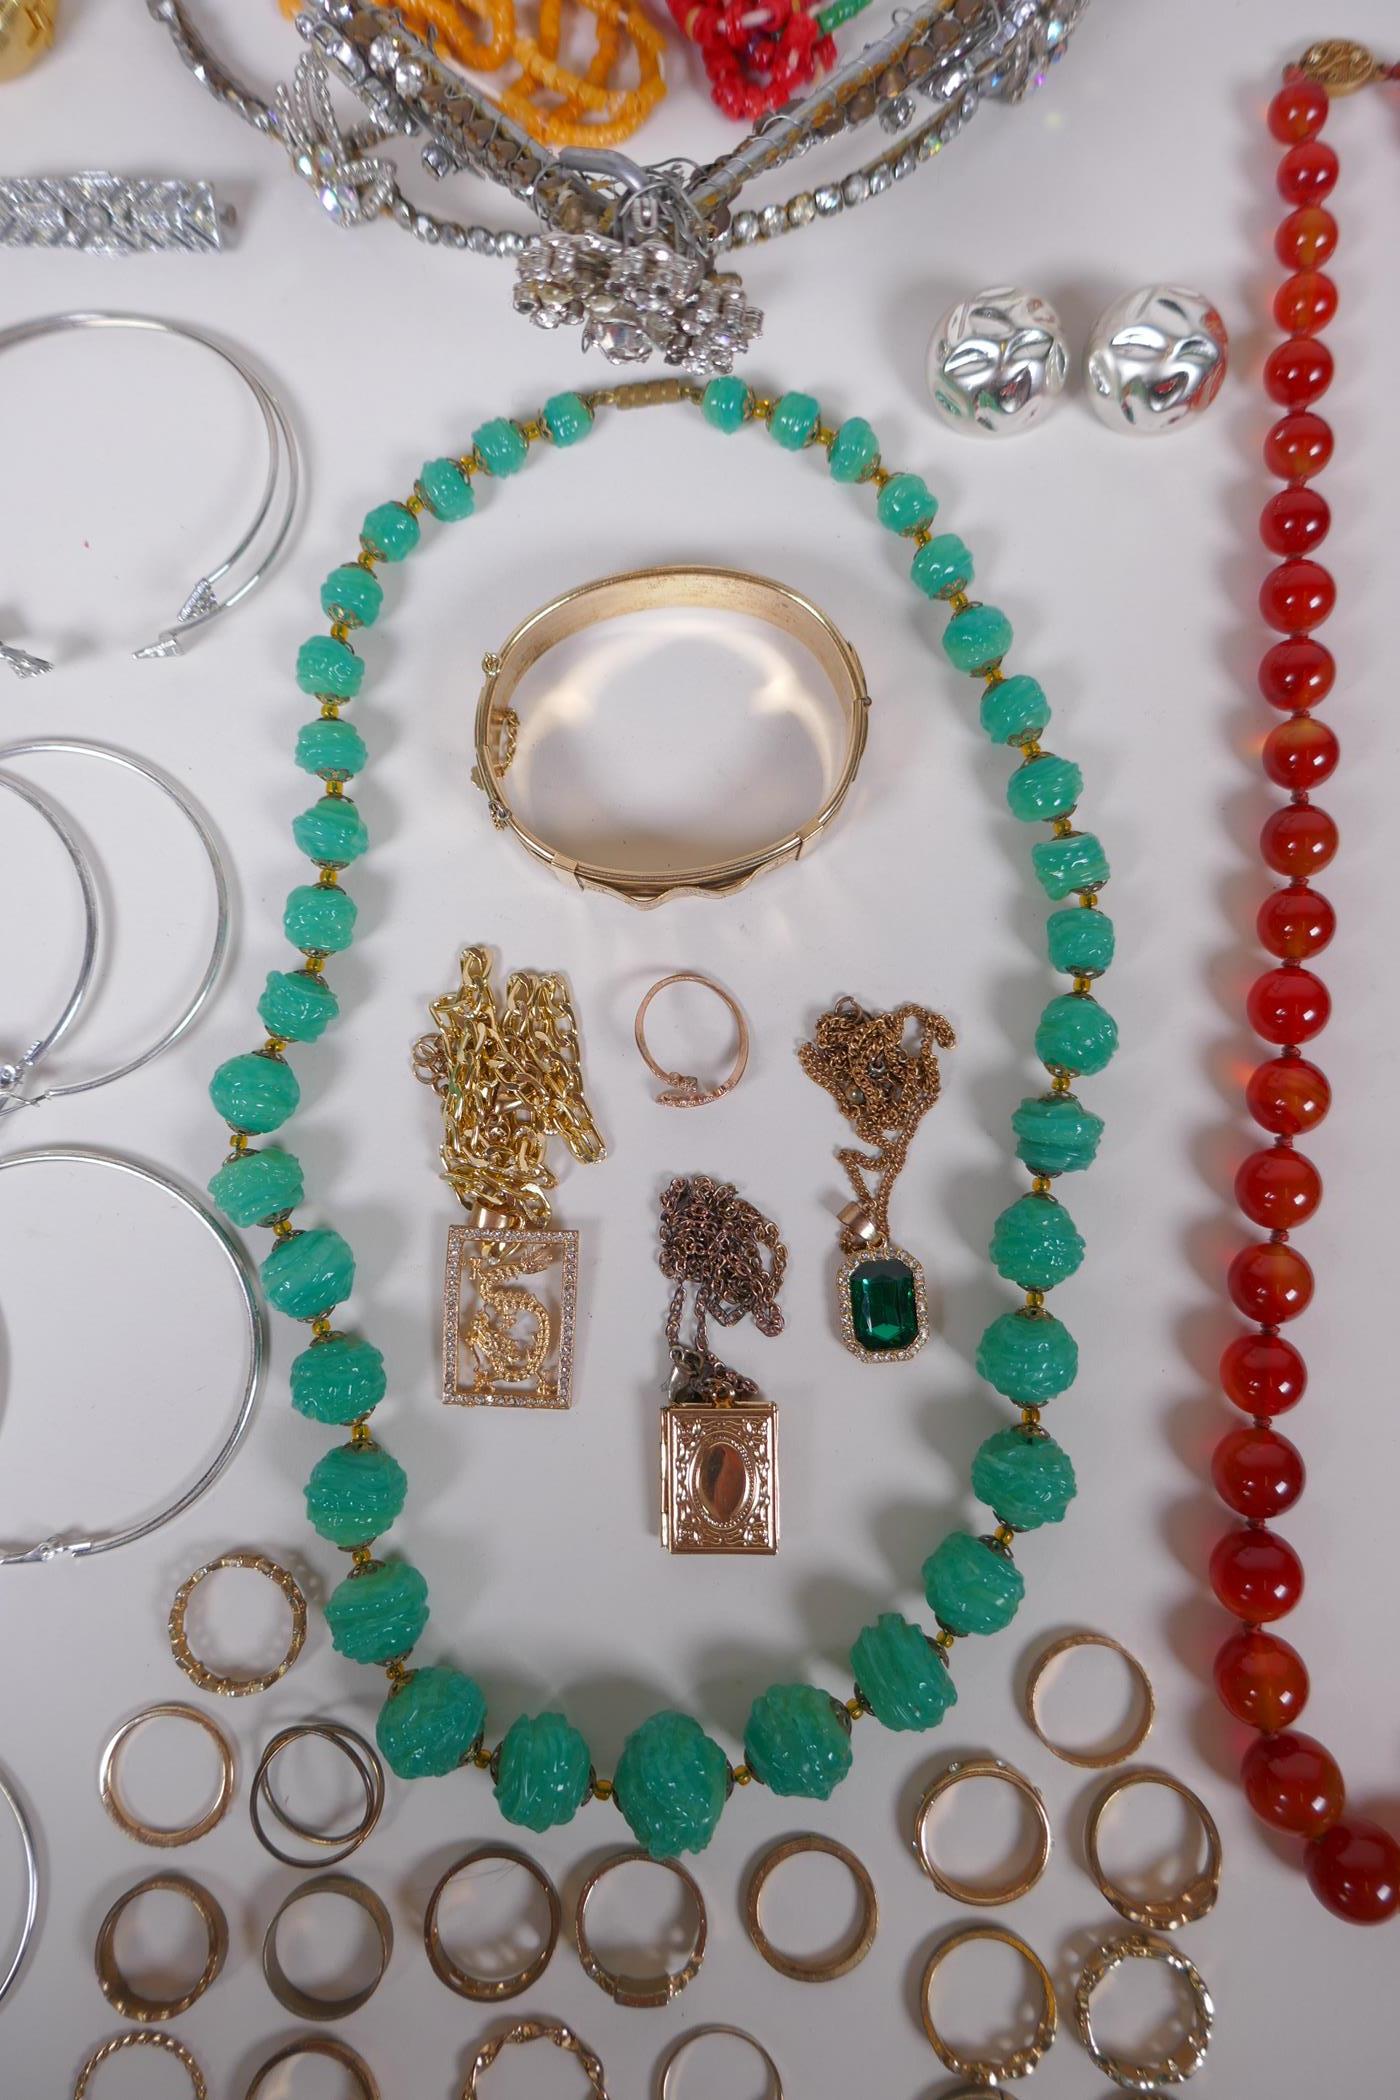 A quantity of vintage costume jewellery including a tiara, bangles, necklaces etc, together with a - Image 3 of 9